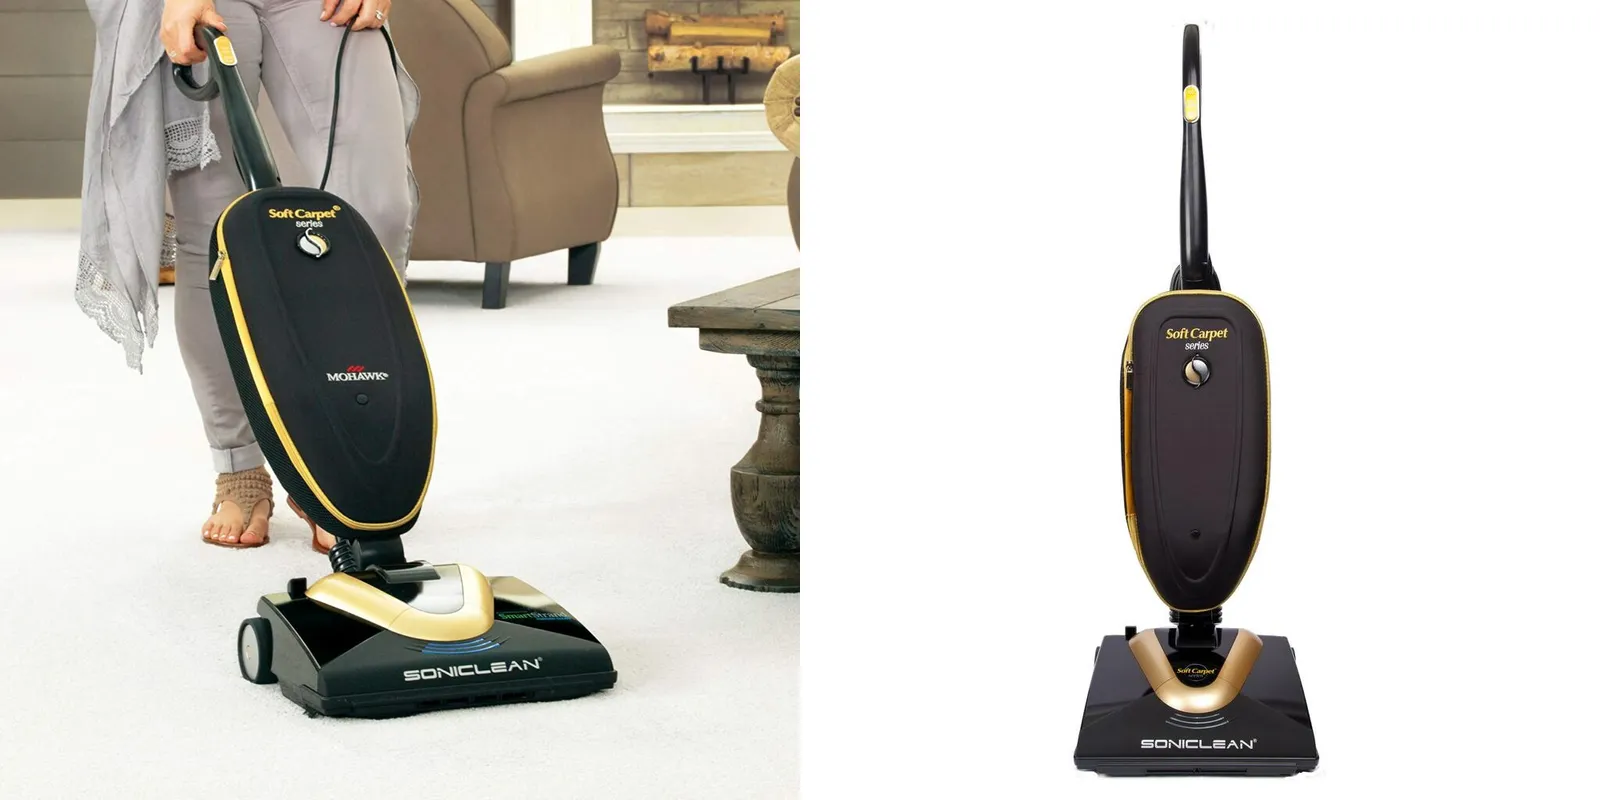 Soniclean Soft Carpet Upright Vacuum Cleaner Review: How good is it?